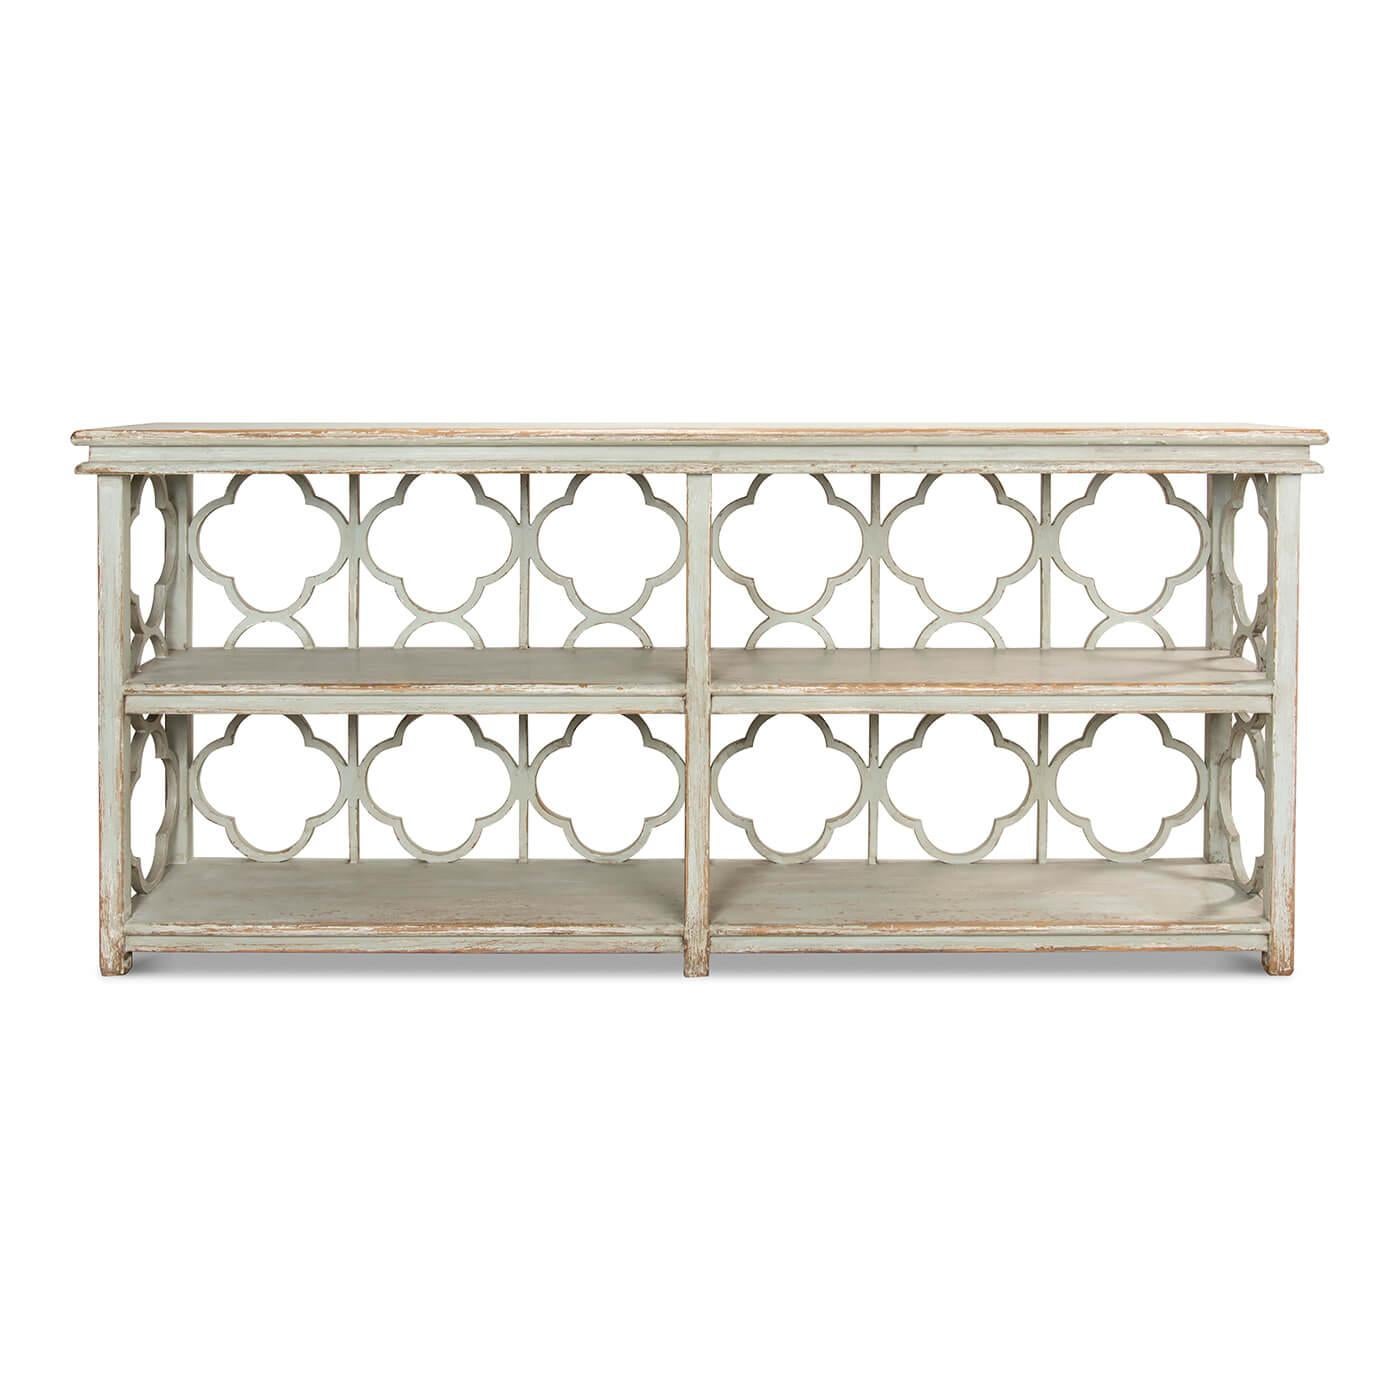 French Country Painted Quatrefoil bookcase or long console table with a painted green distressed finish. A beautiful piece for book storage and display, this bookcase console table features an openwork quatrefoil design on the back and sides.